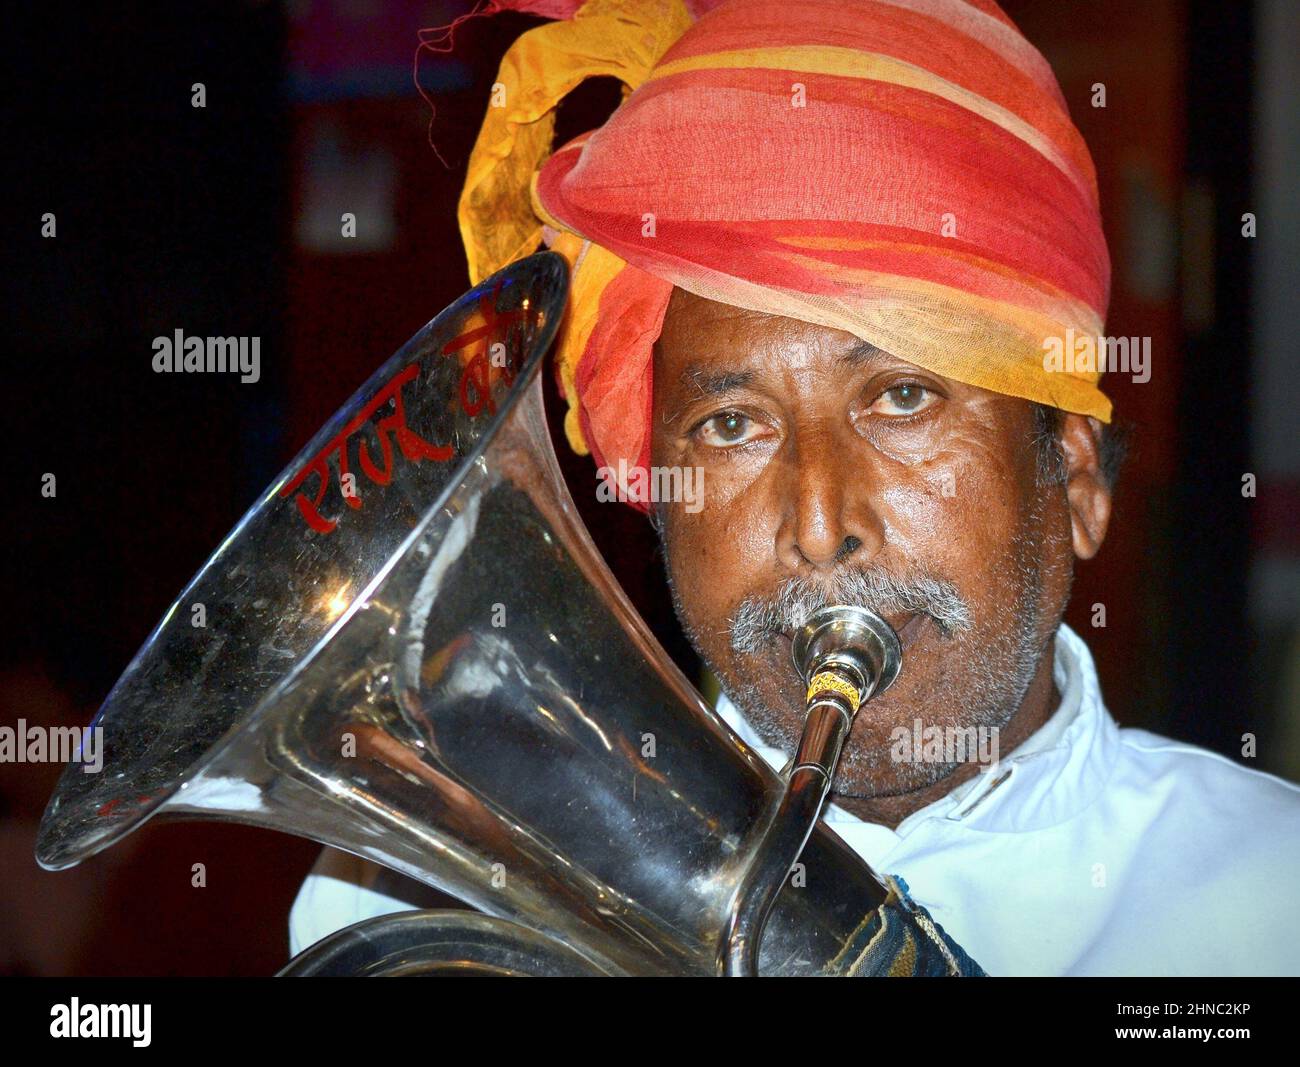 Elderly turbaned euphoniumist from a marching Indian British brass band plays his traditional euphonium musical instrument and looks at the camera. Stock Photo